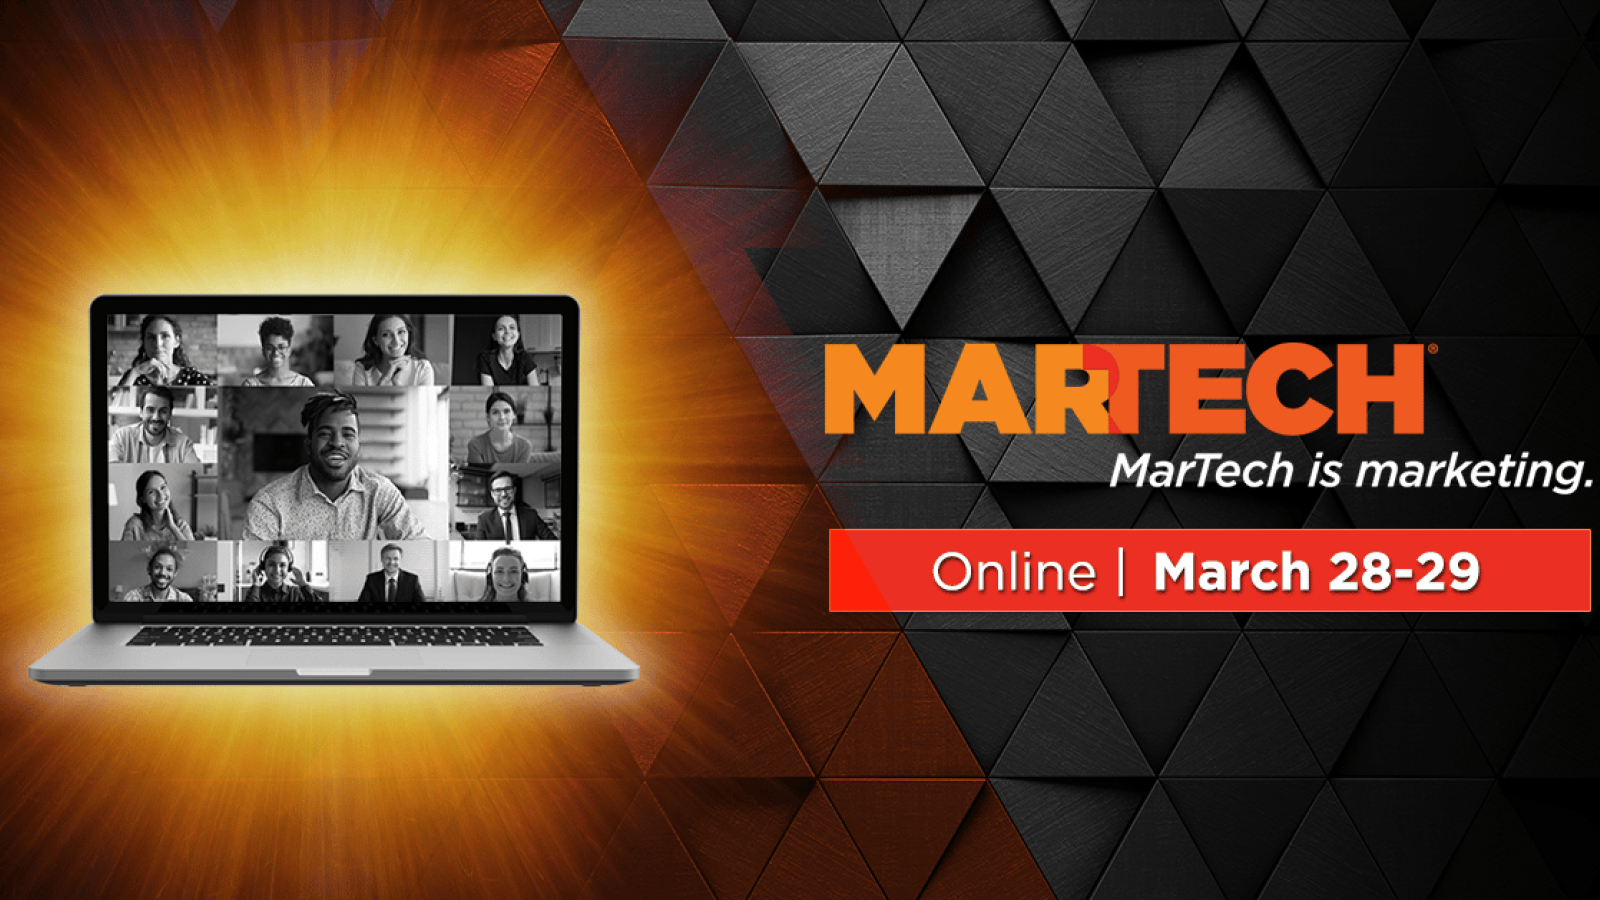 Join us online THIS WEEK for MarTech for free